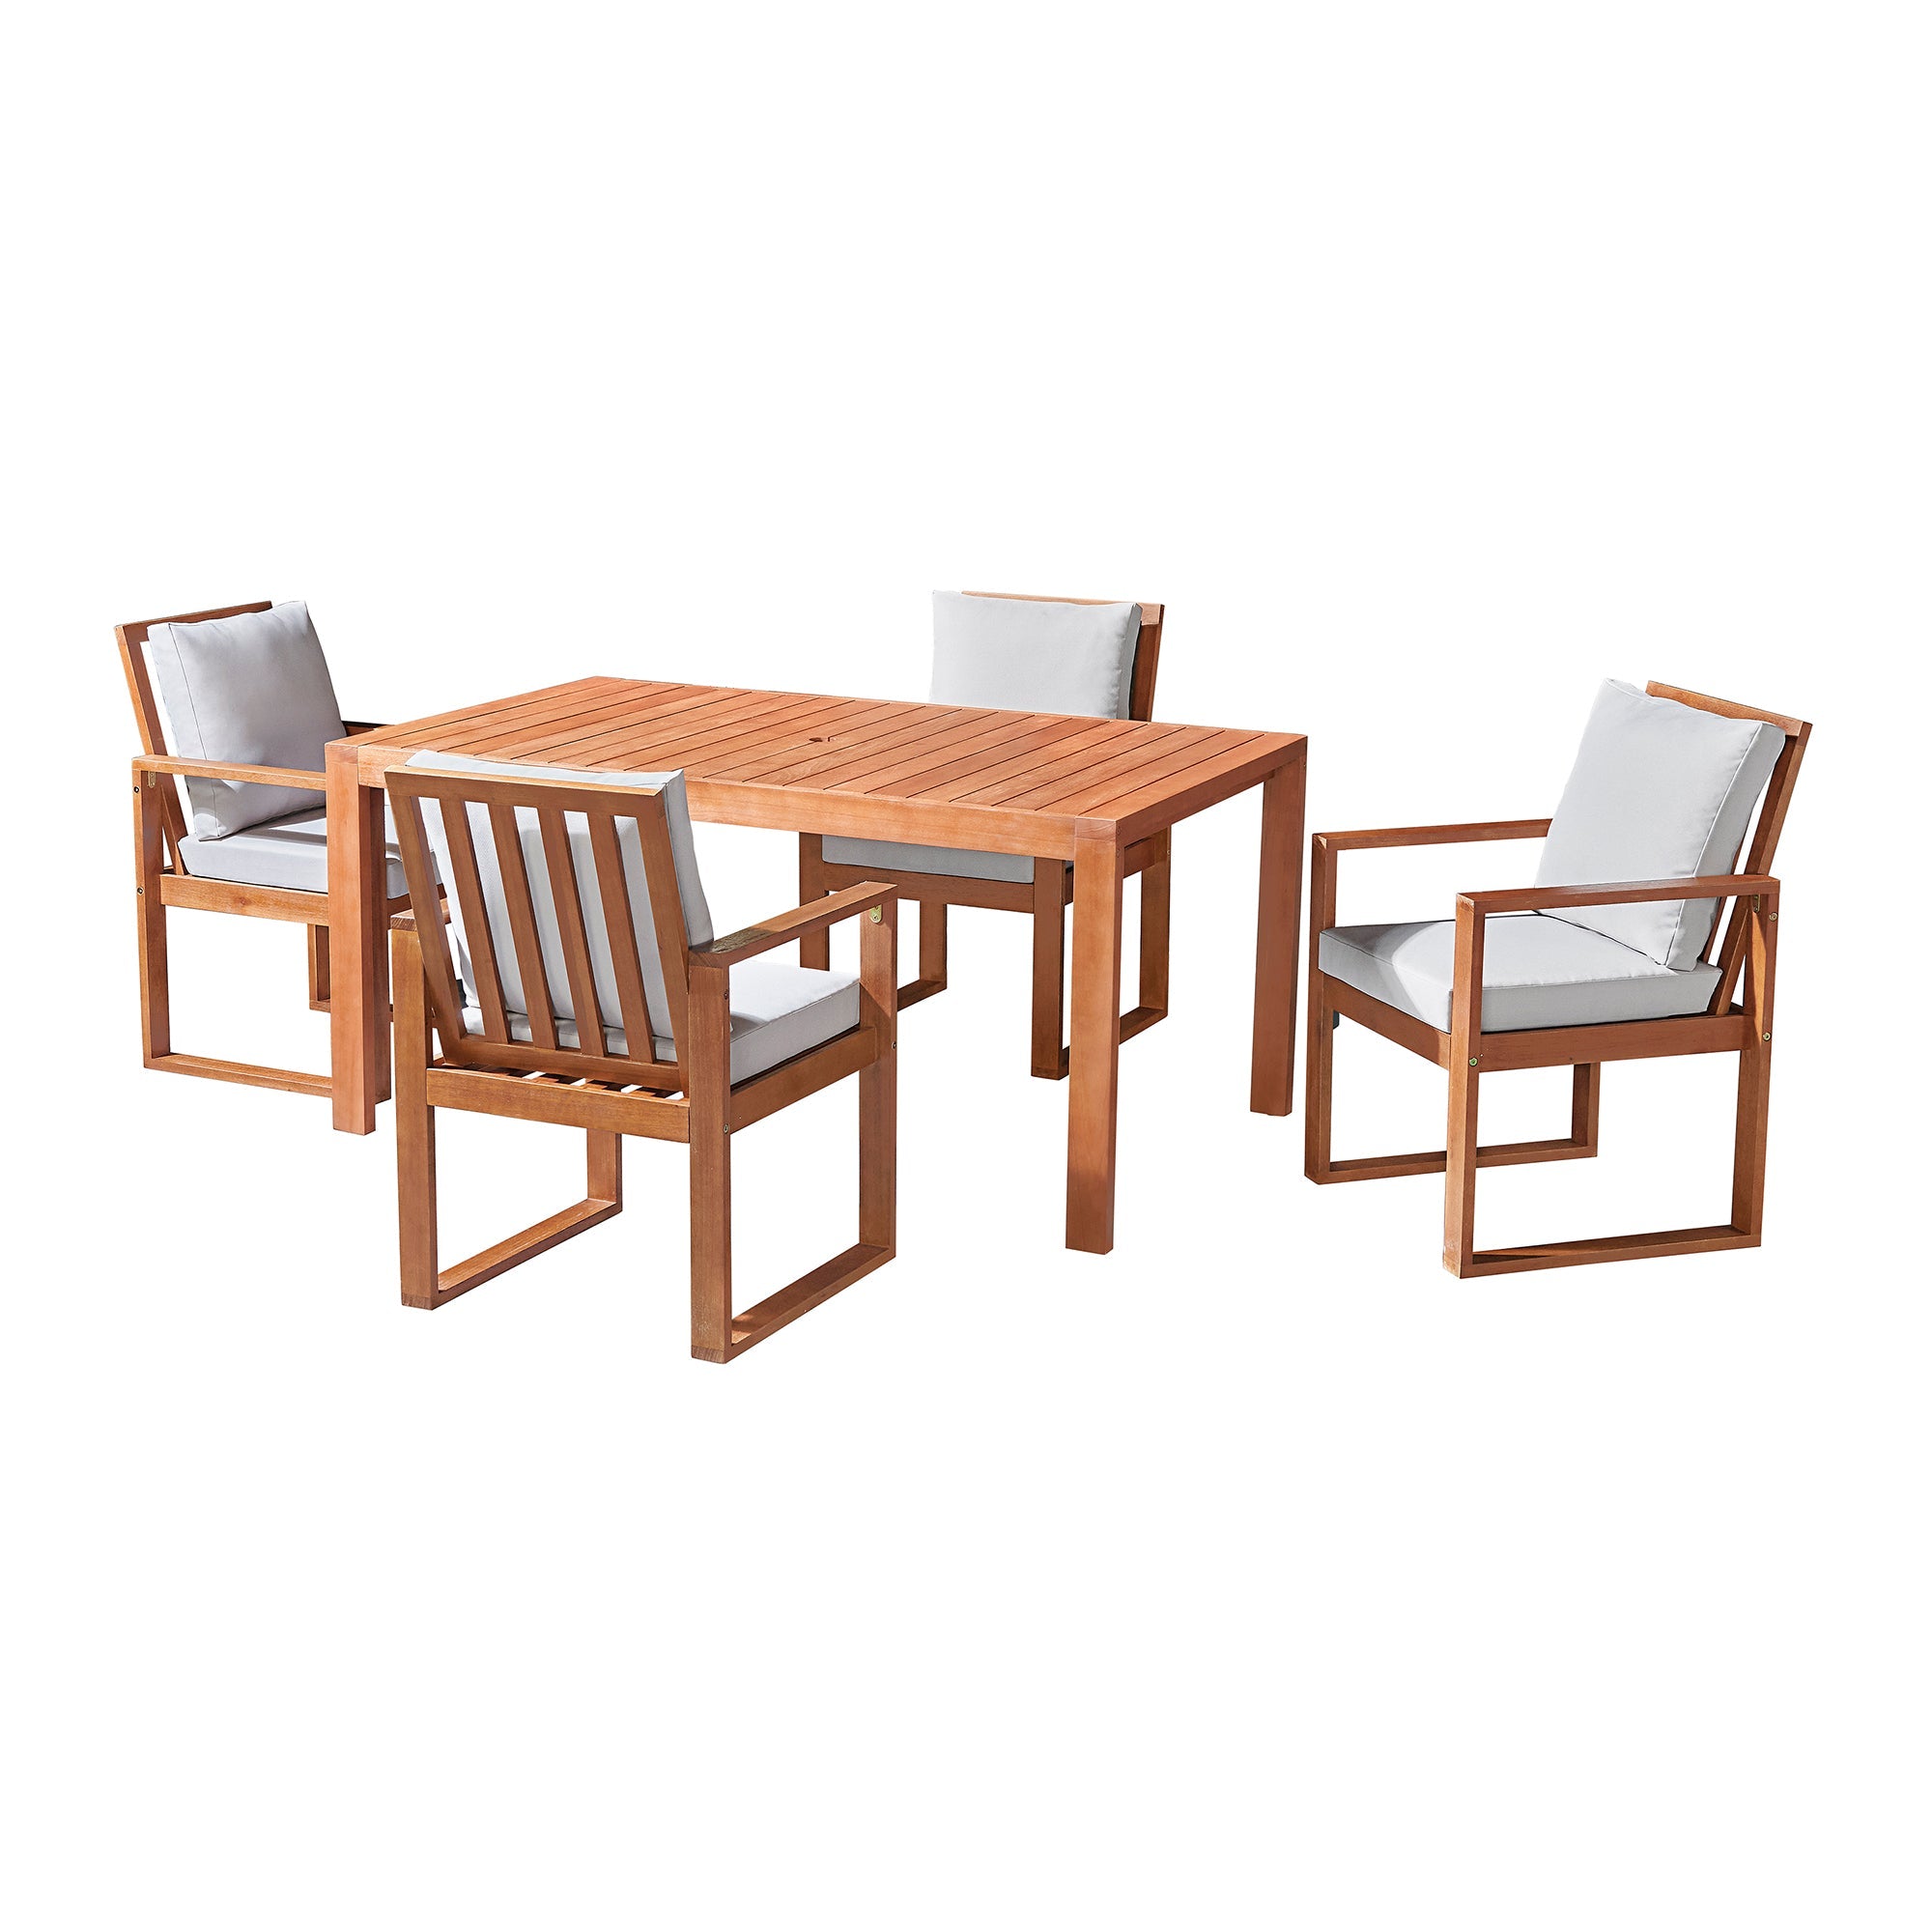 Natural-Weston-Eucalyptus-Wood-Outdoor-Dining-Table-with-4-Dining-Chairs,-Set-of-5-Outdoor-Dining